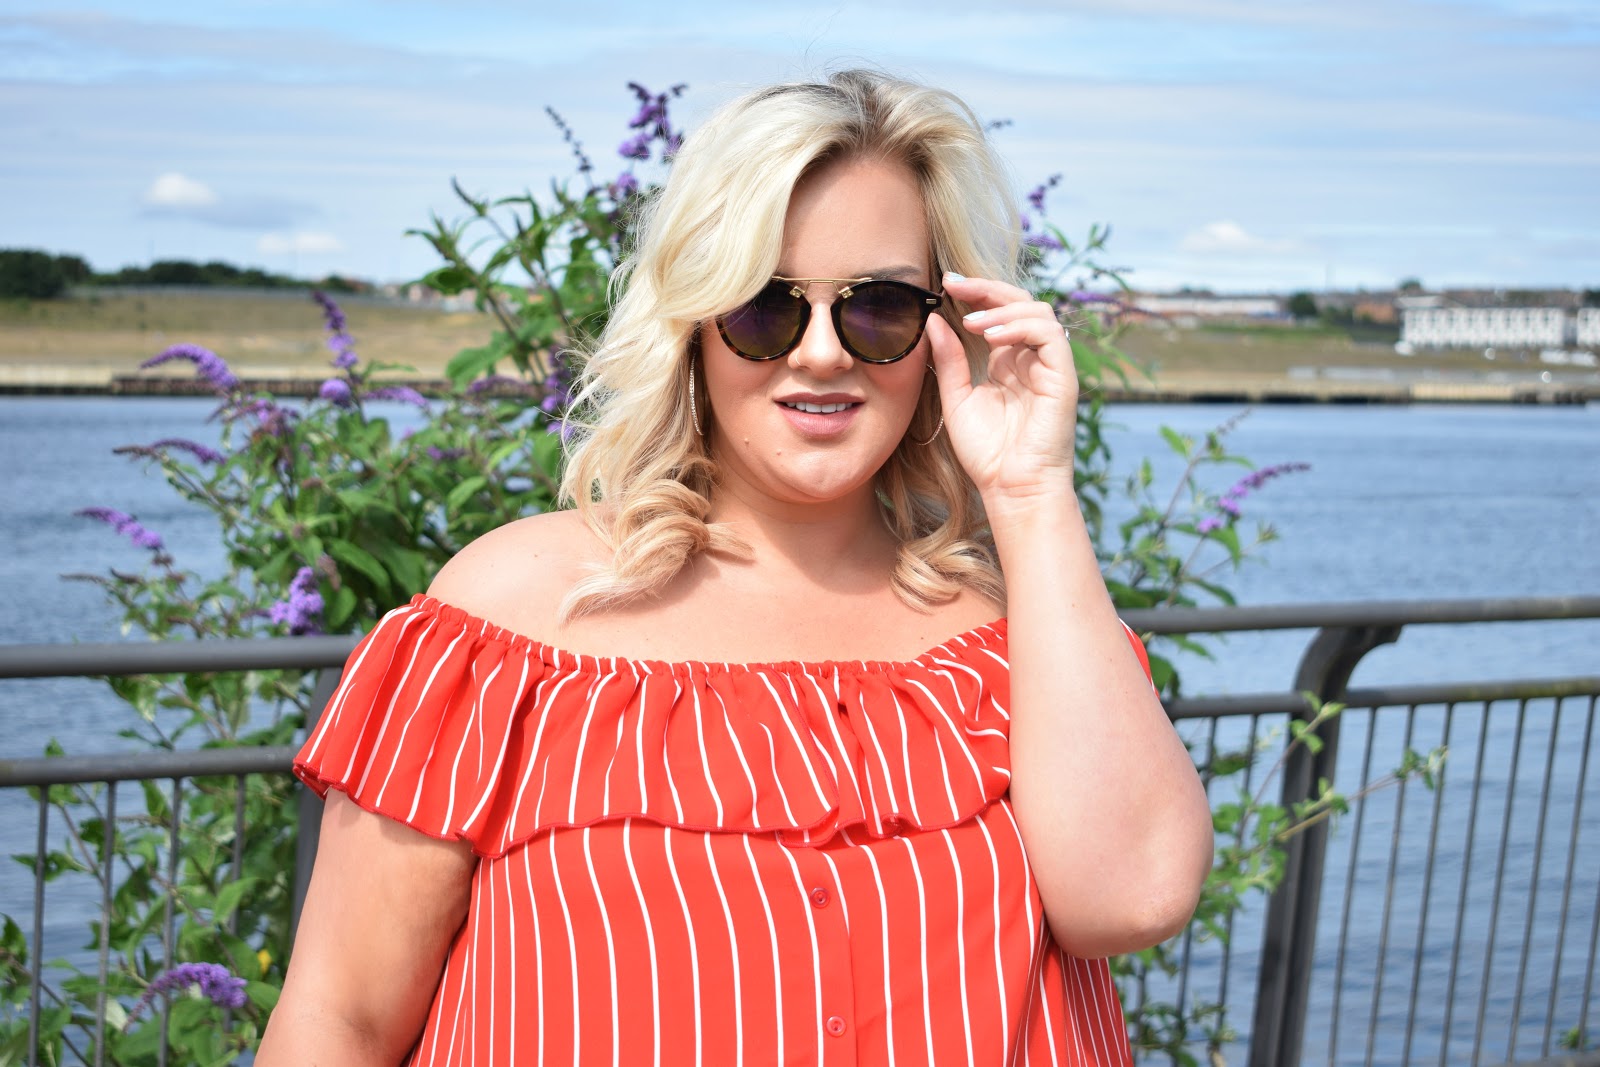 UK Plus Size Fashion Blogger WhatLauraLoves- a Sunderland lass writing about the importance of staying humble